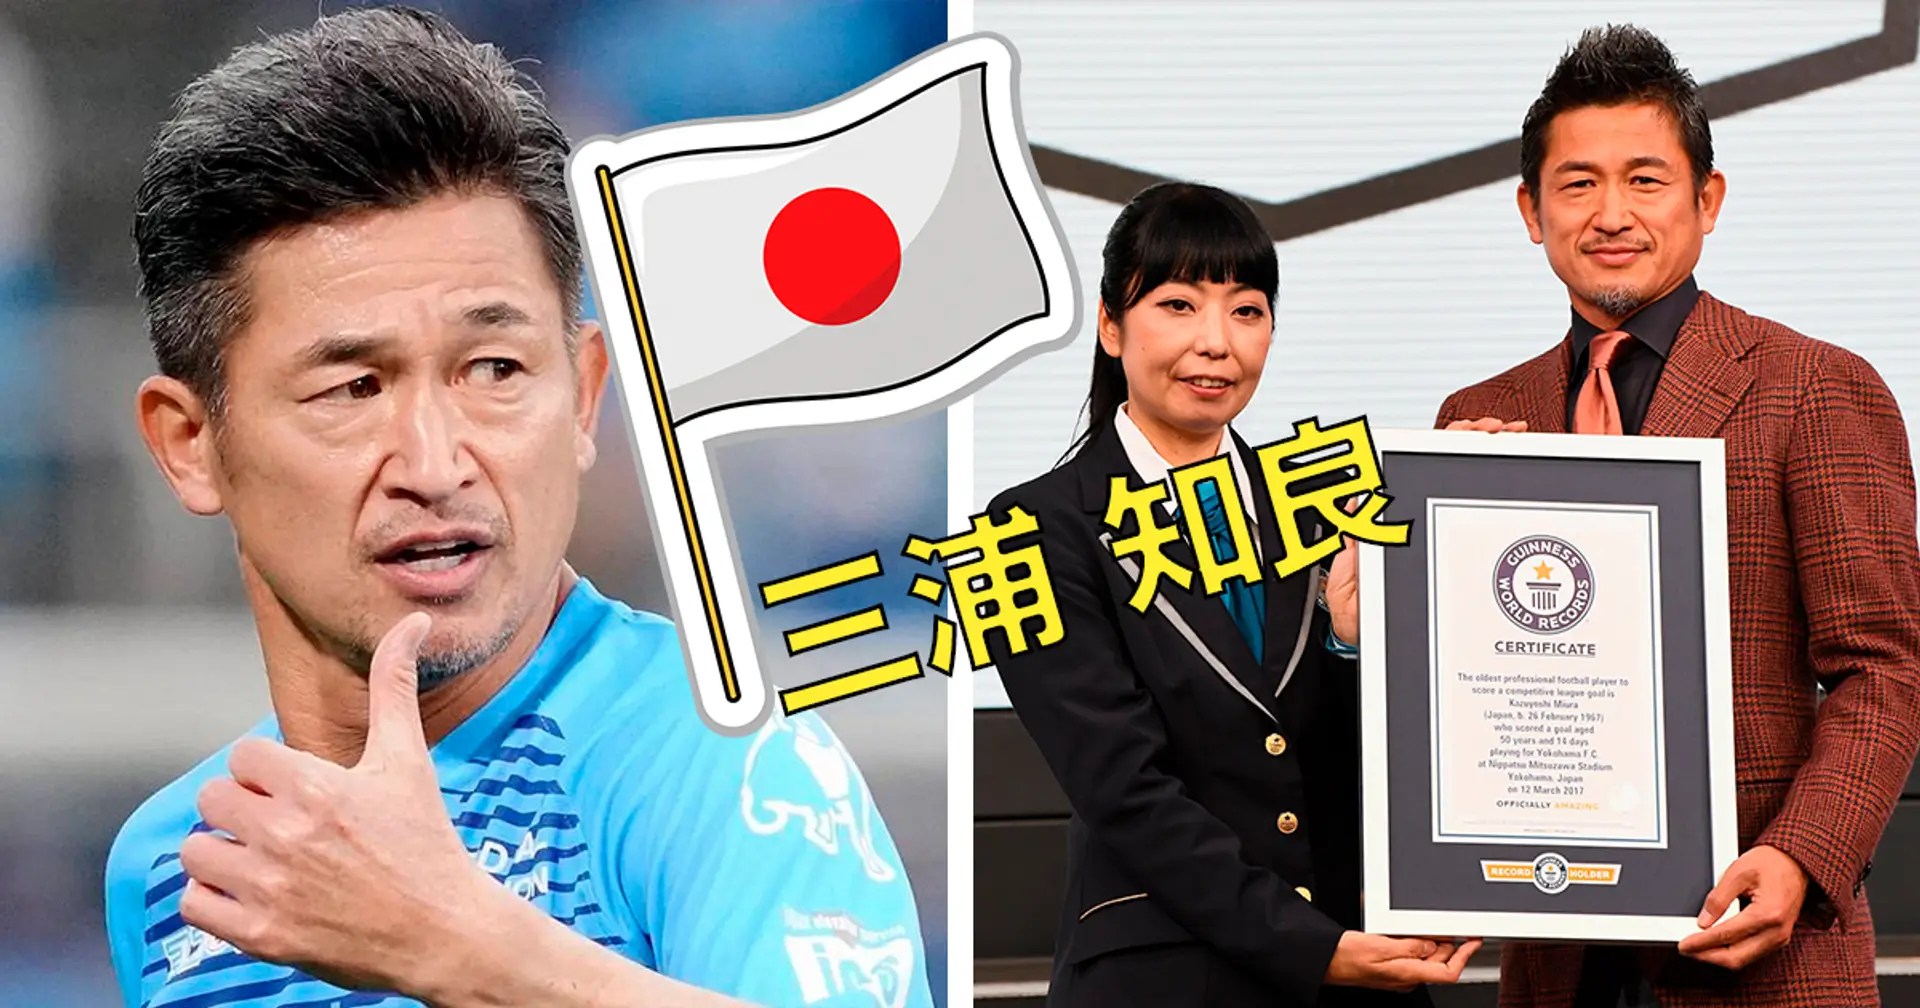 World’s oldest professional player Kazu Miura joins the 15th team of his career, he’ll turn 55 next month